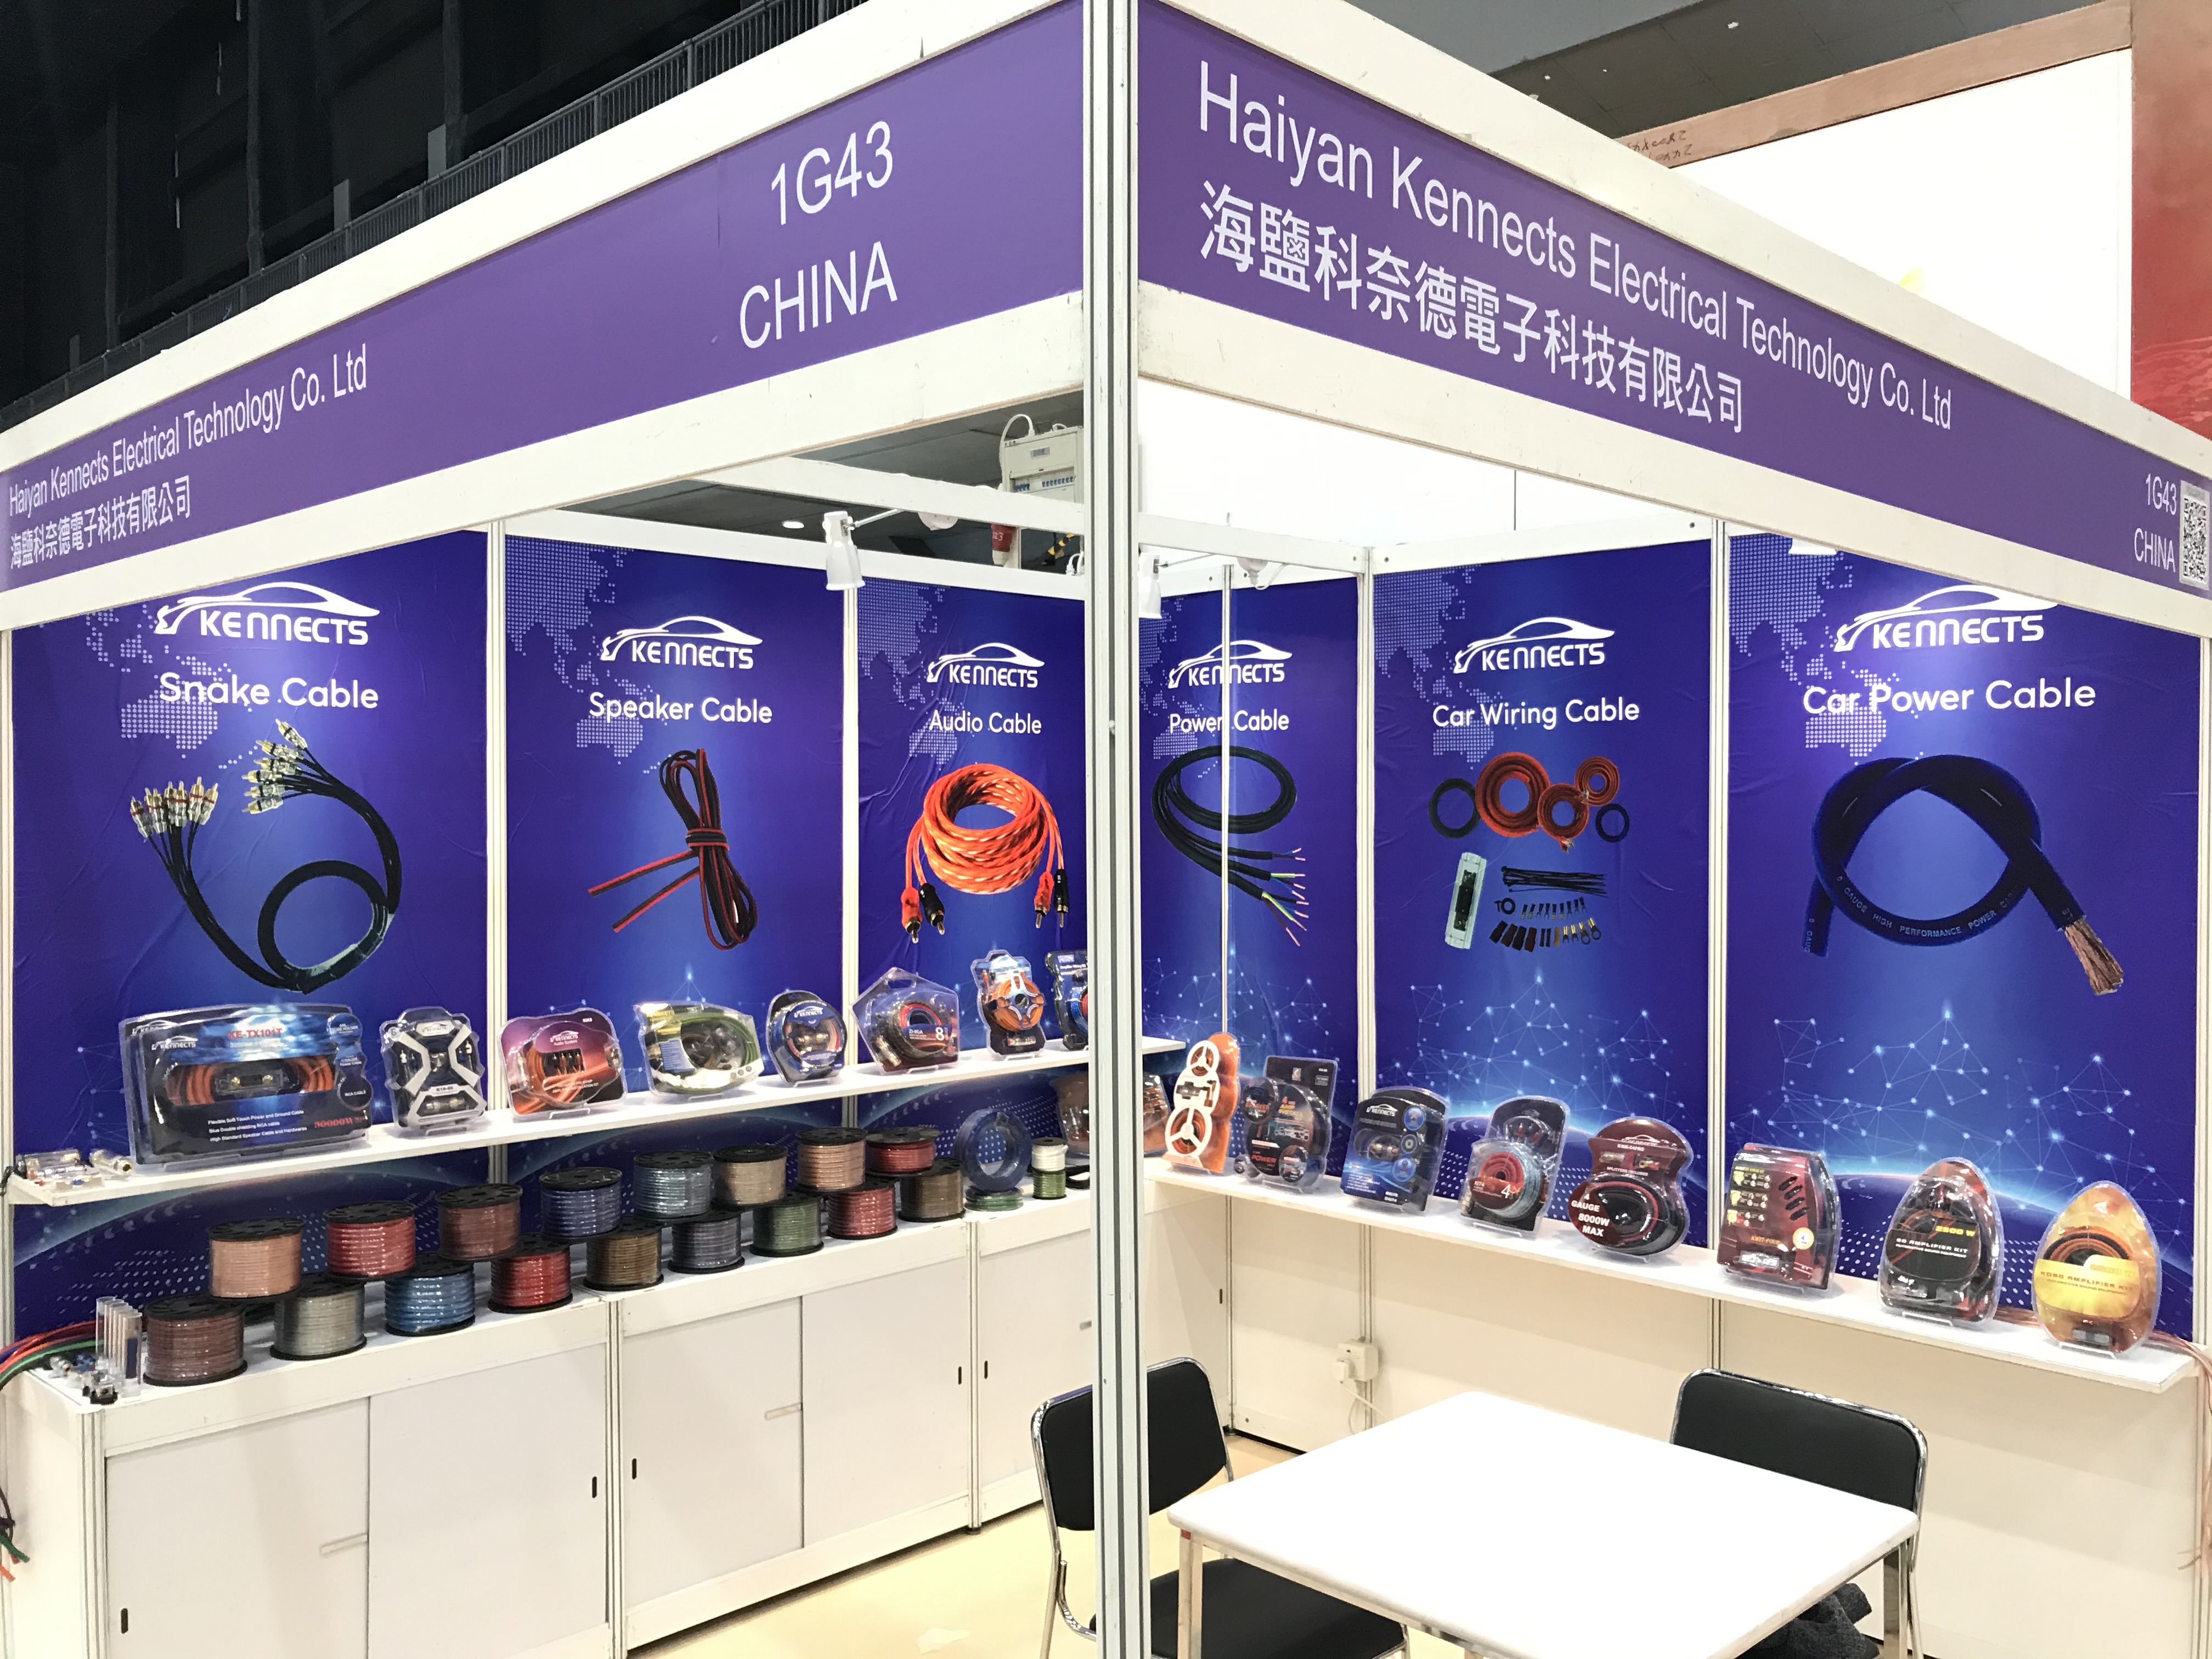 Hong Kong Global Sources Electronic Fair Booth number 7P40